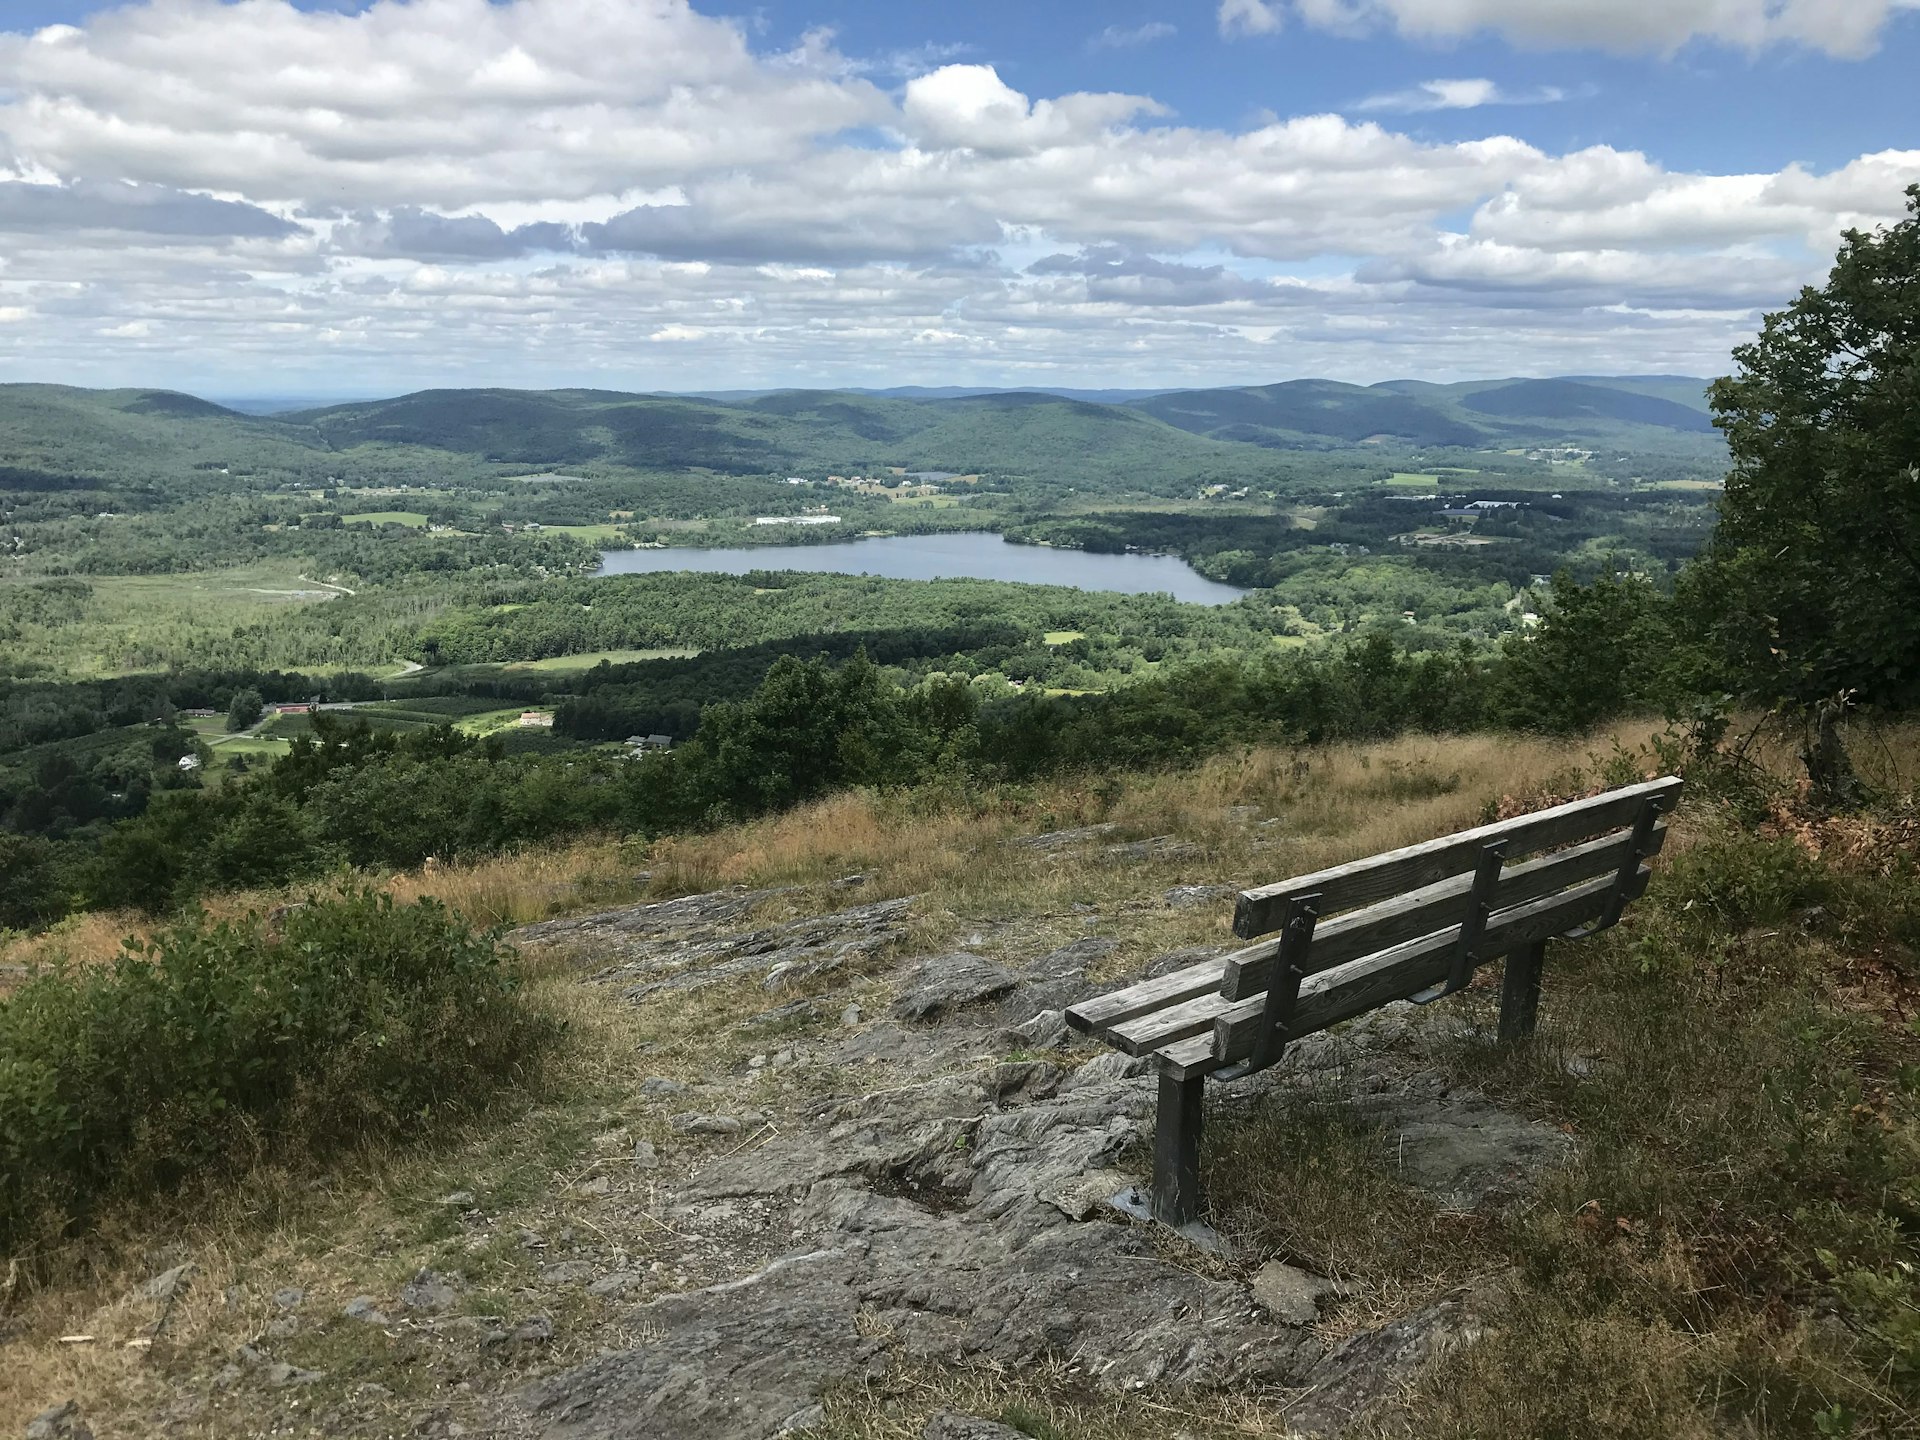 A chance to relax and look out over the Berkshires on The High Road